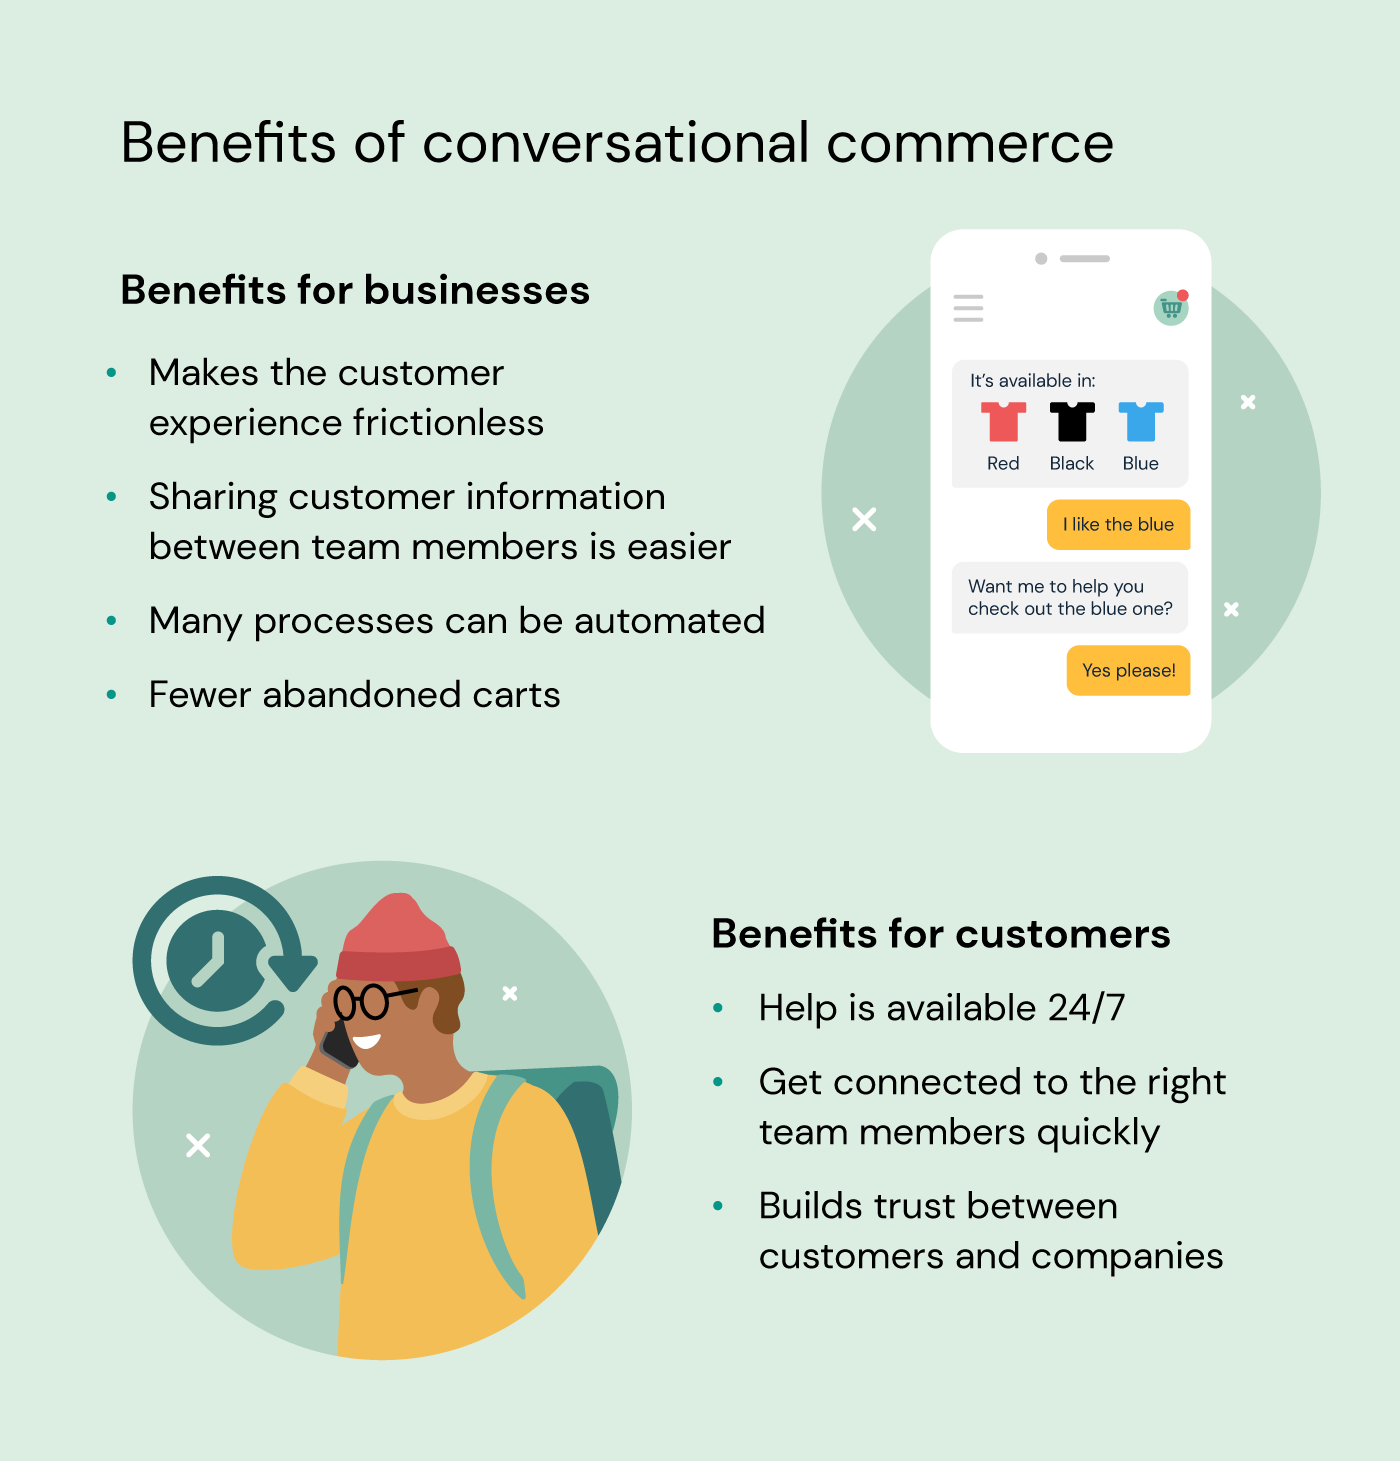 Illustration highlights the benefits of conversational commerce